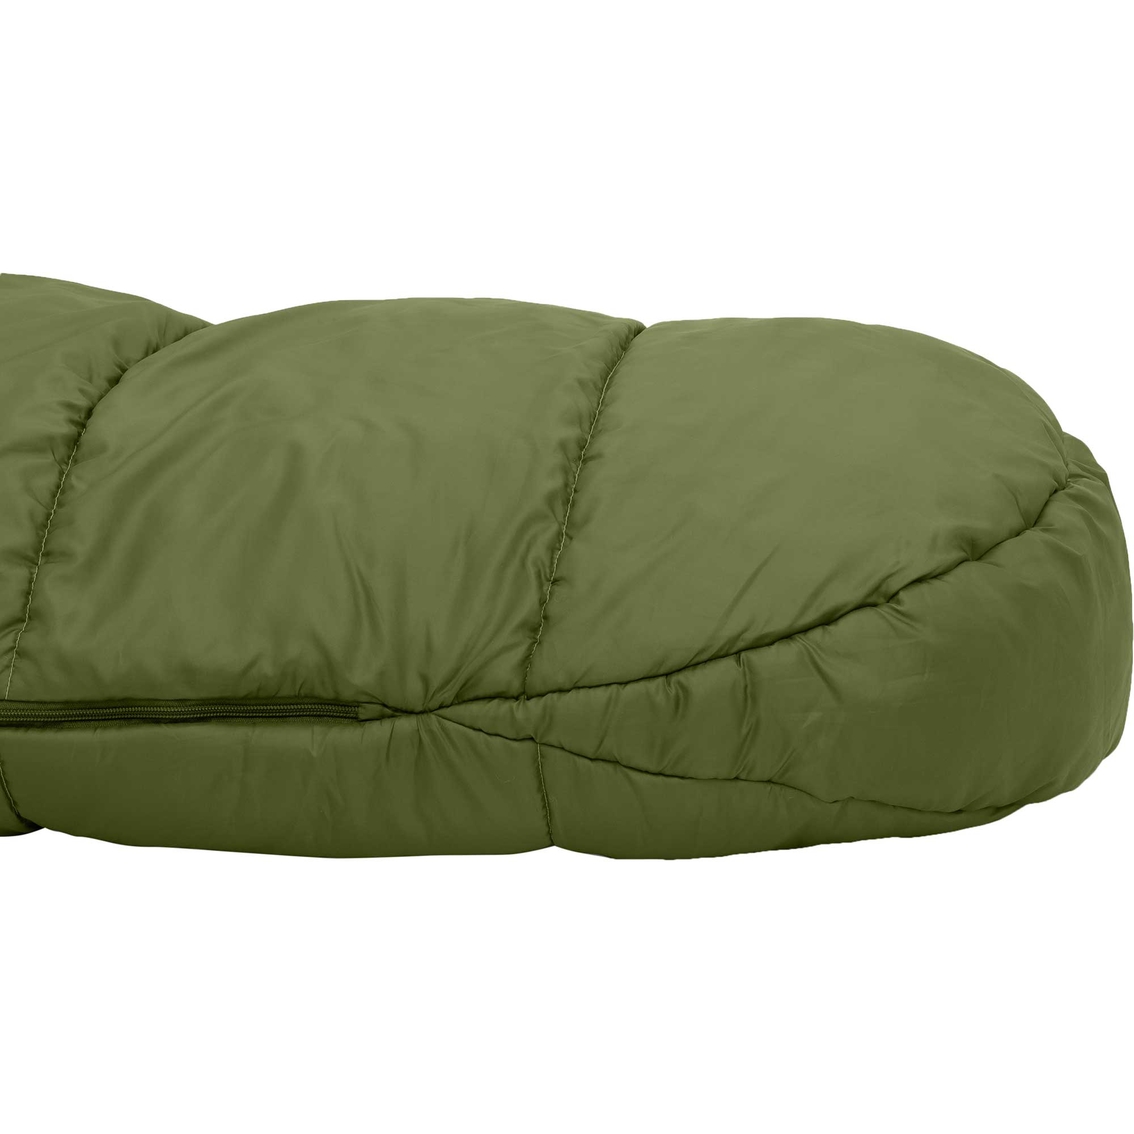 Outdoor Products 20F Mummy Sleeping Bag - Image 7 of 10